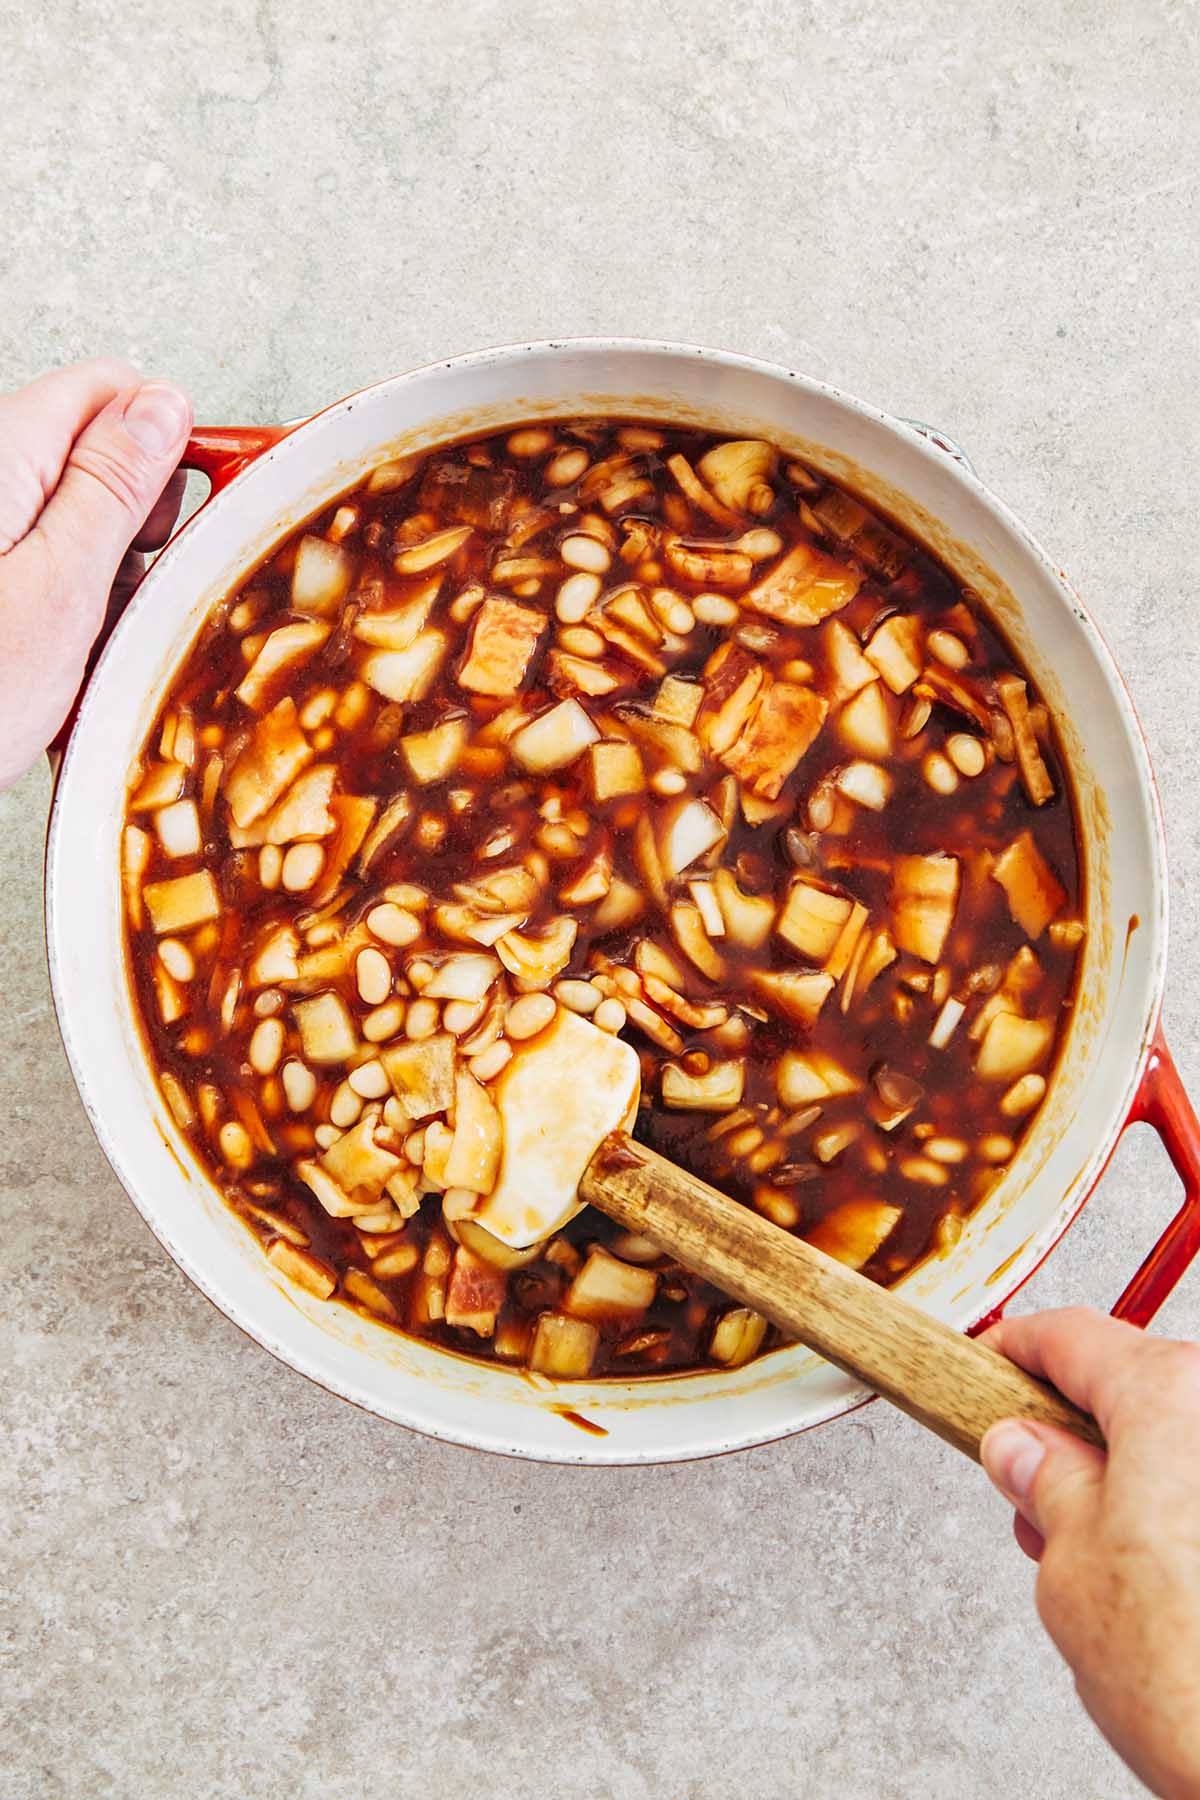 Hands stirring a pot of beans, ketchup, molasses, bacon, and onion with a wooden handled rubber spatula.